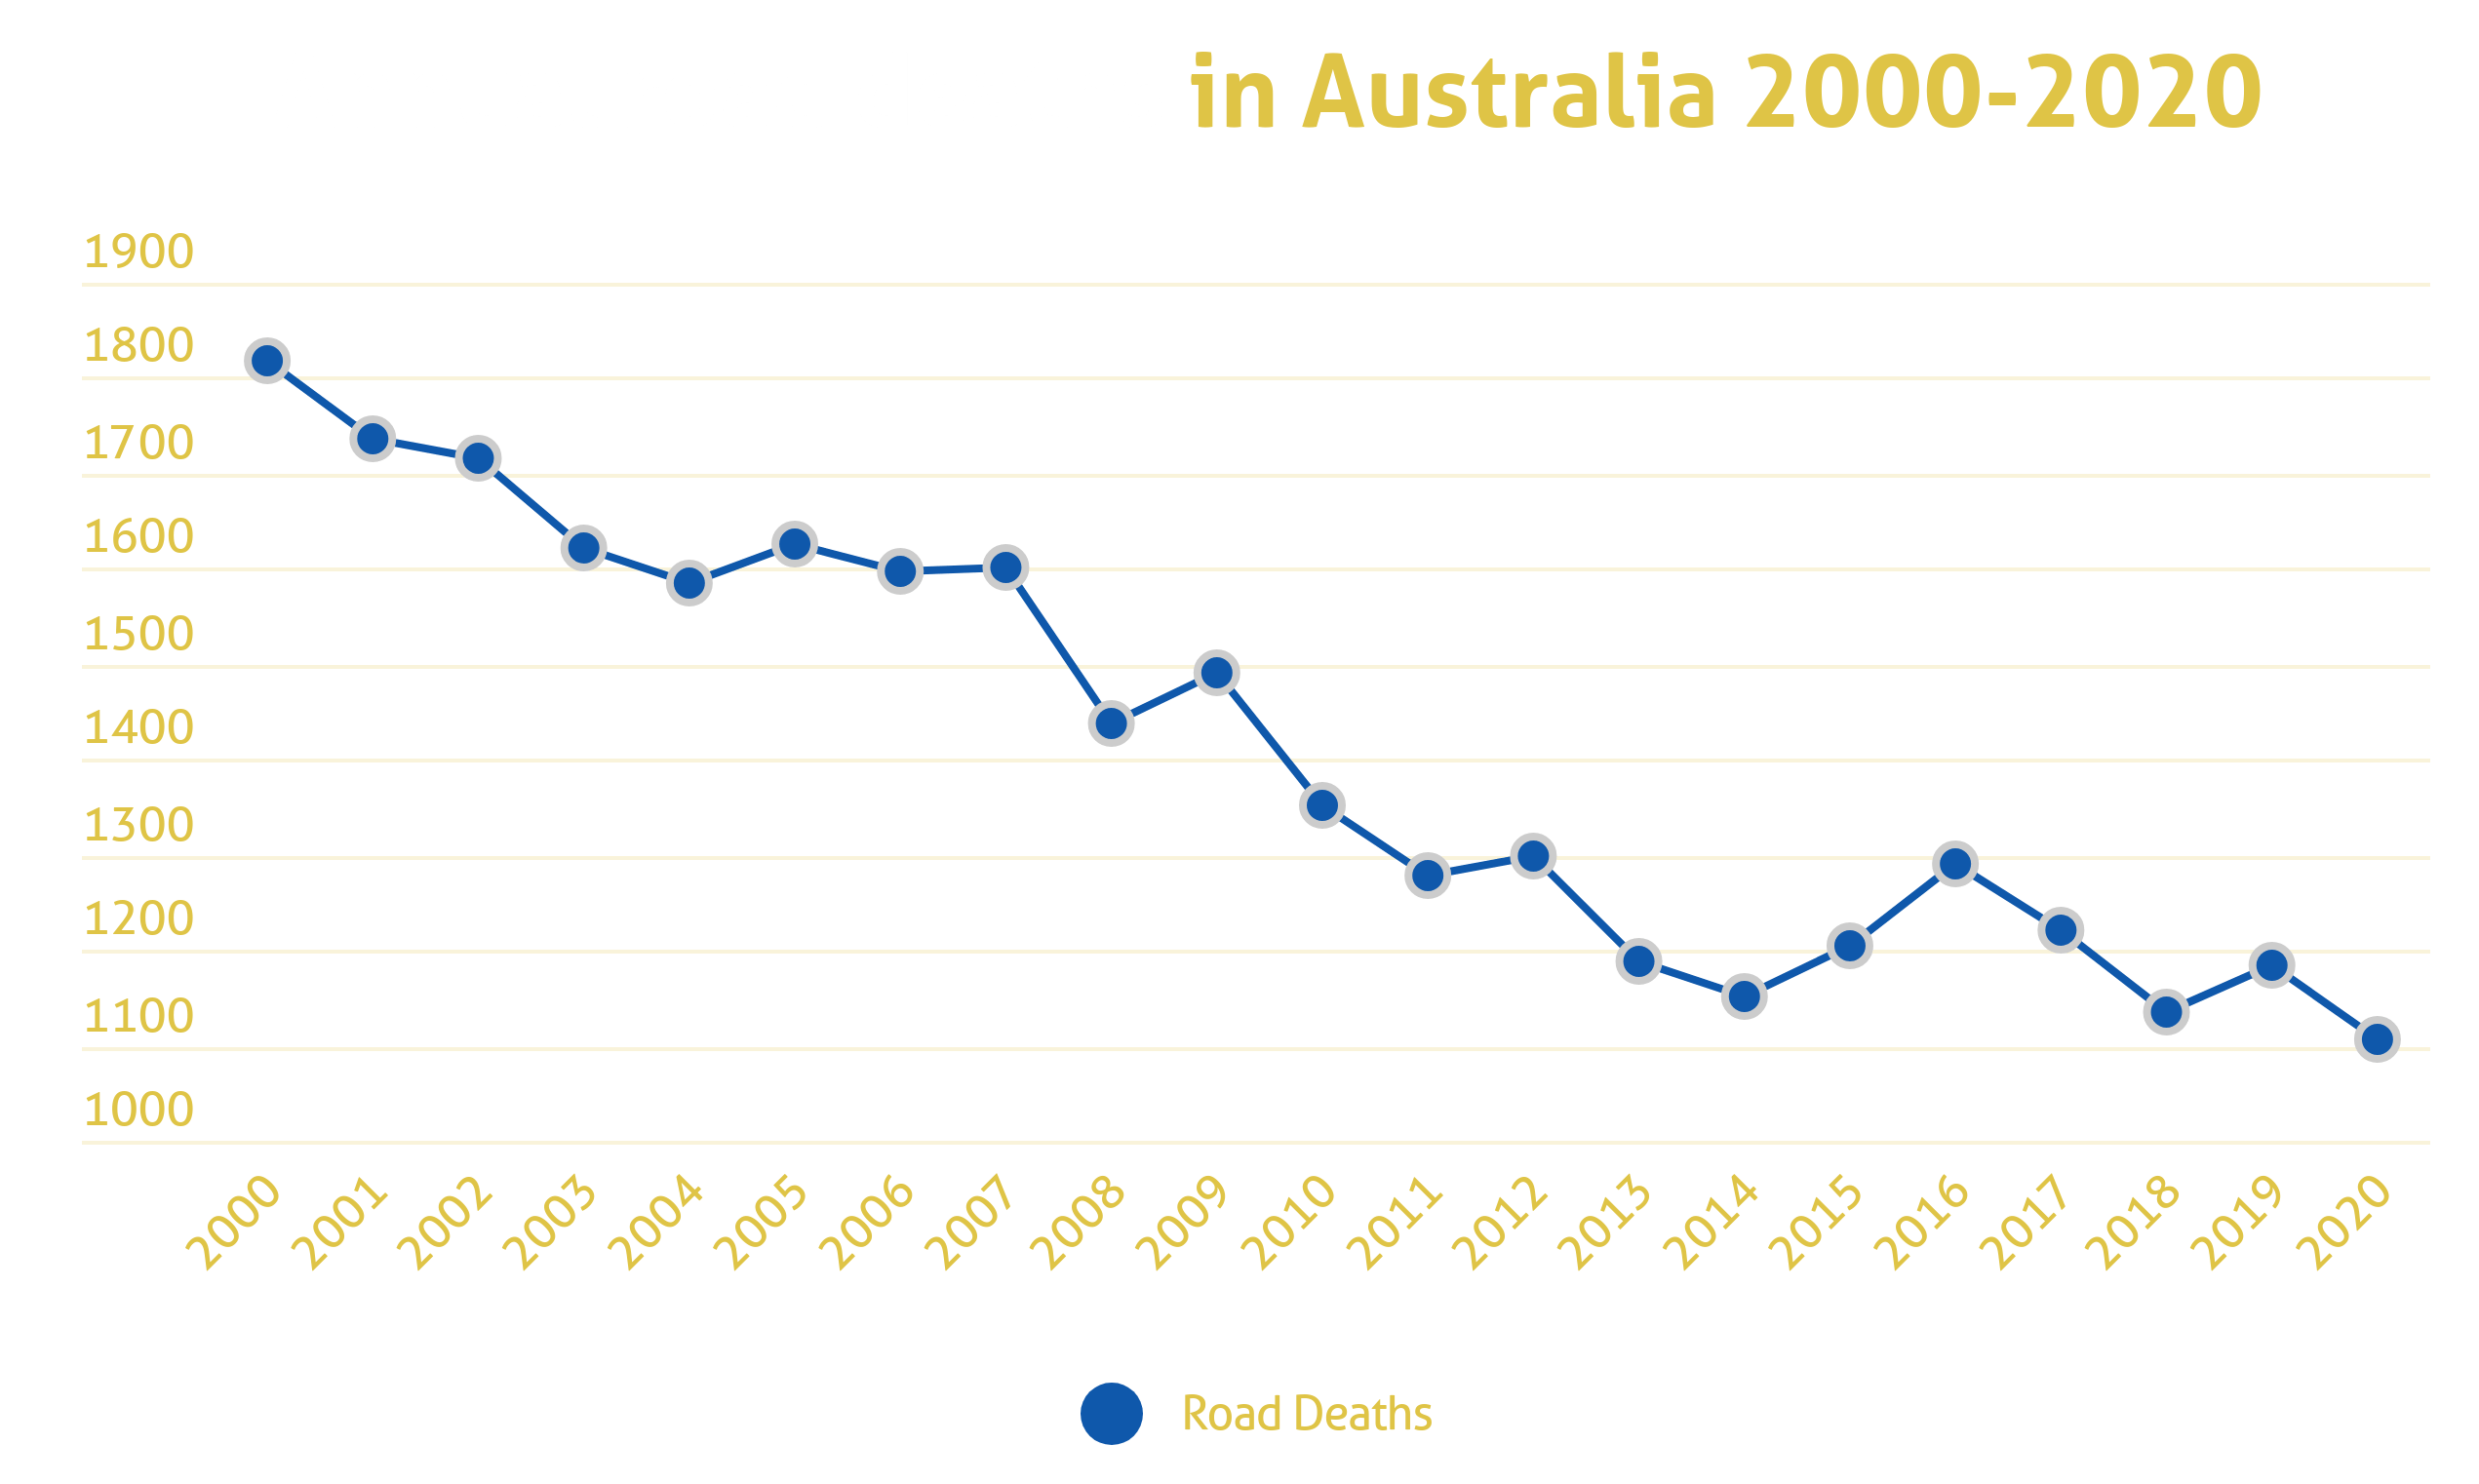 a line chart showing the Australian road fatality rate per capita from 2000 to 2020